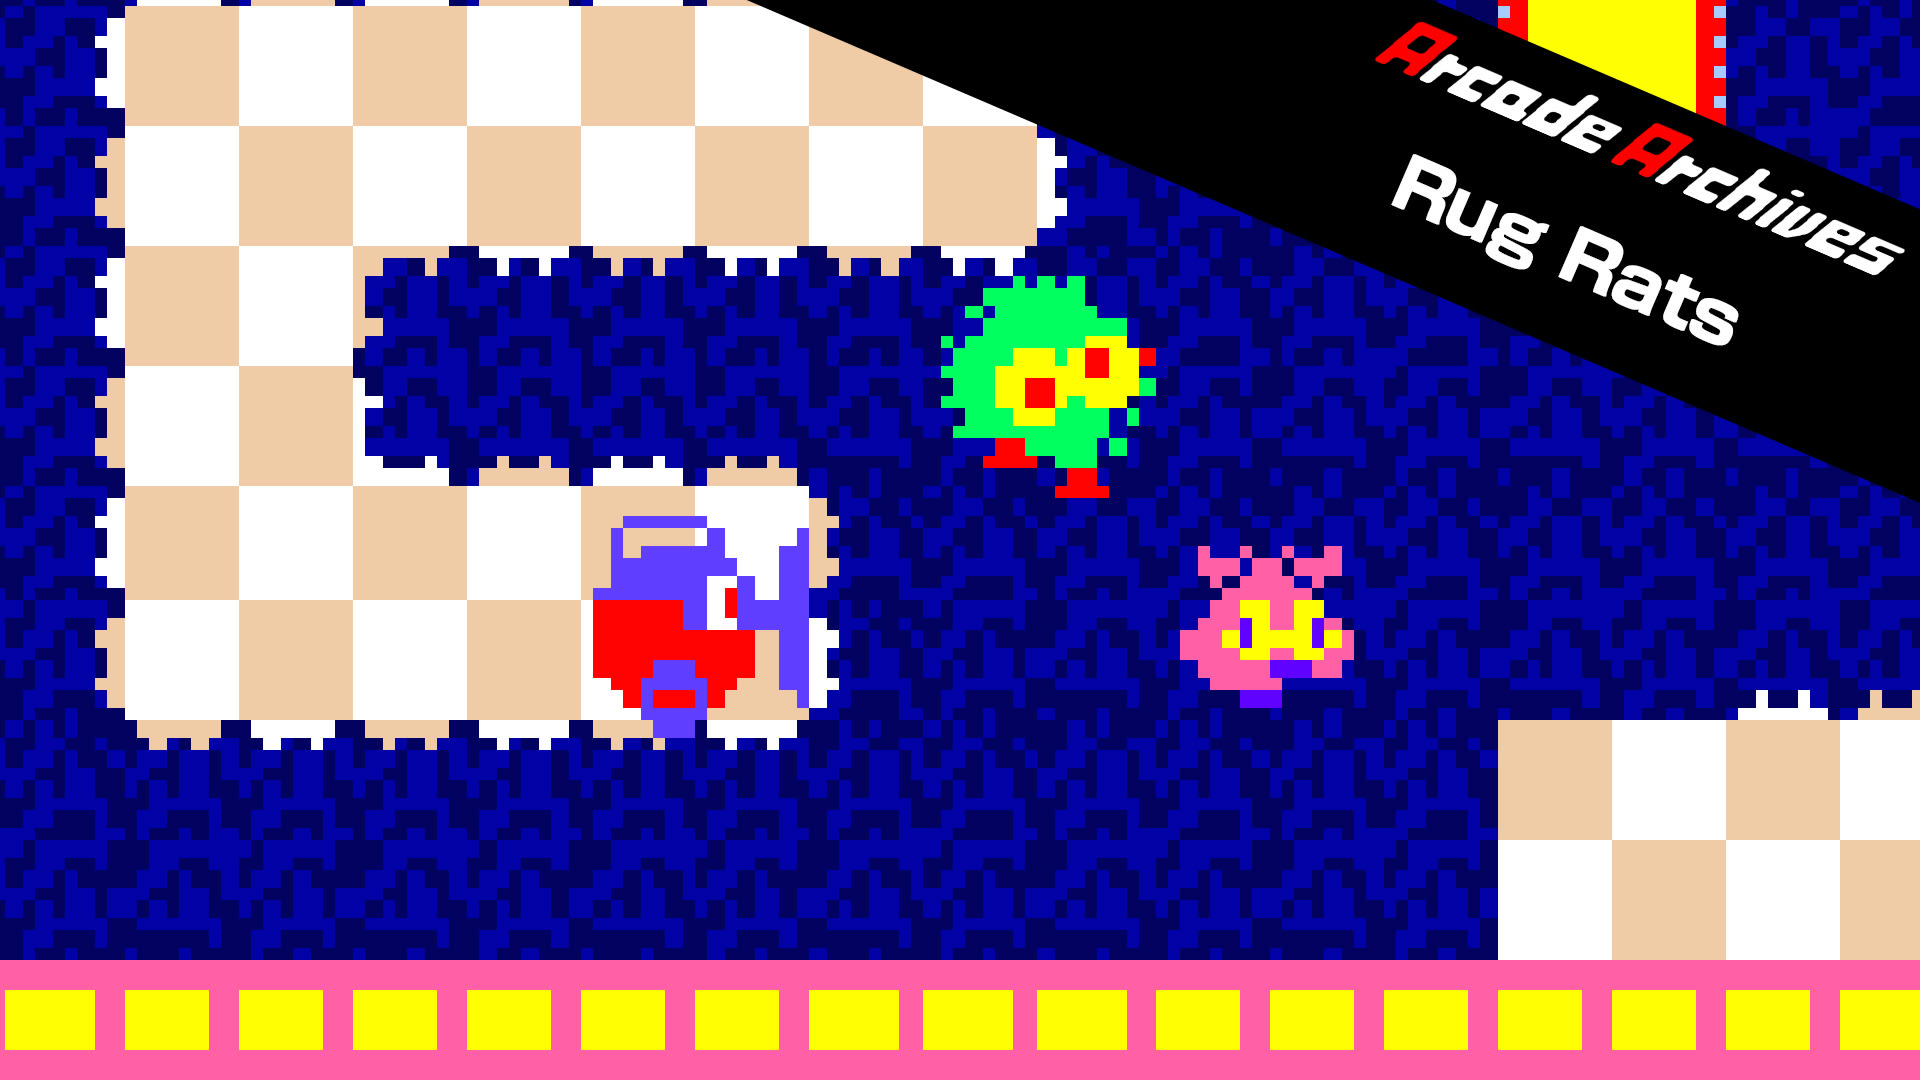 Arcade Archives Rug Rats 1